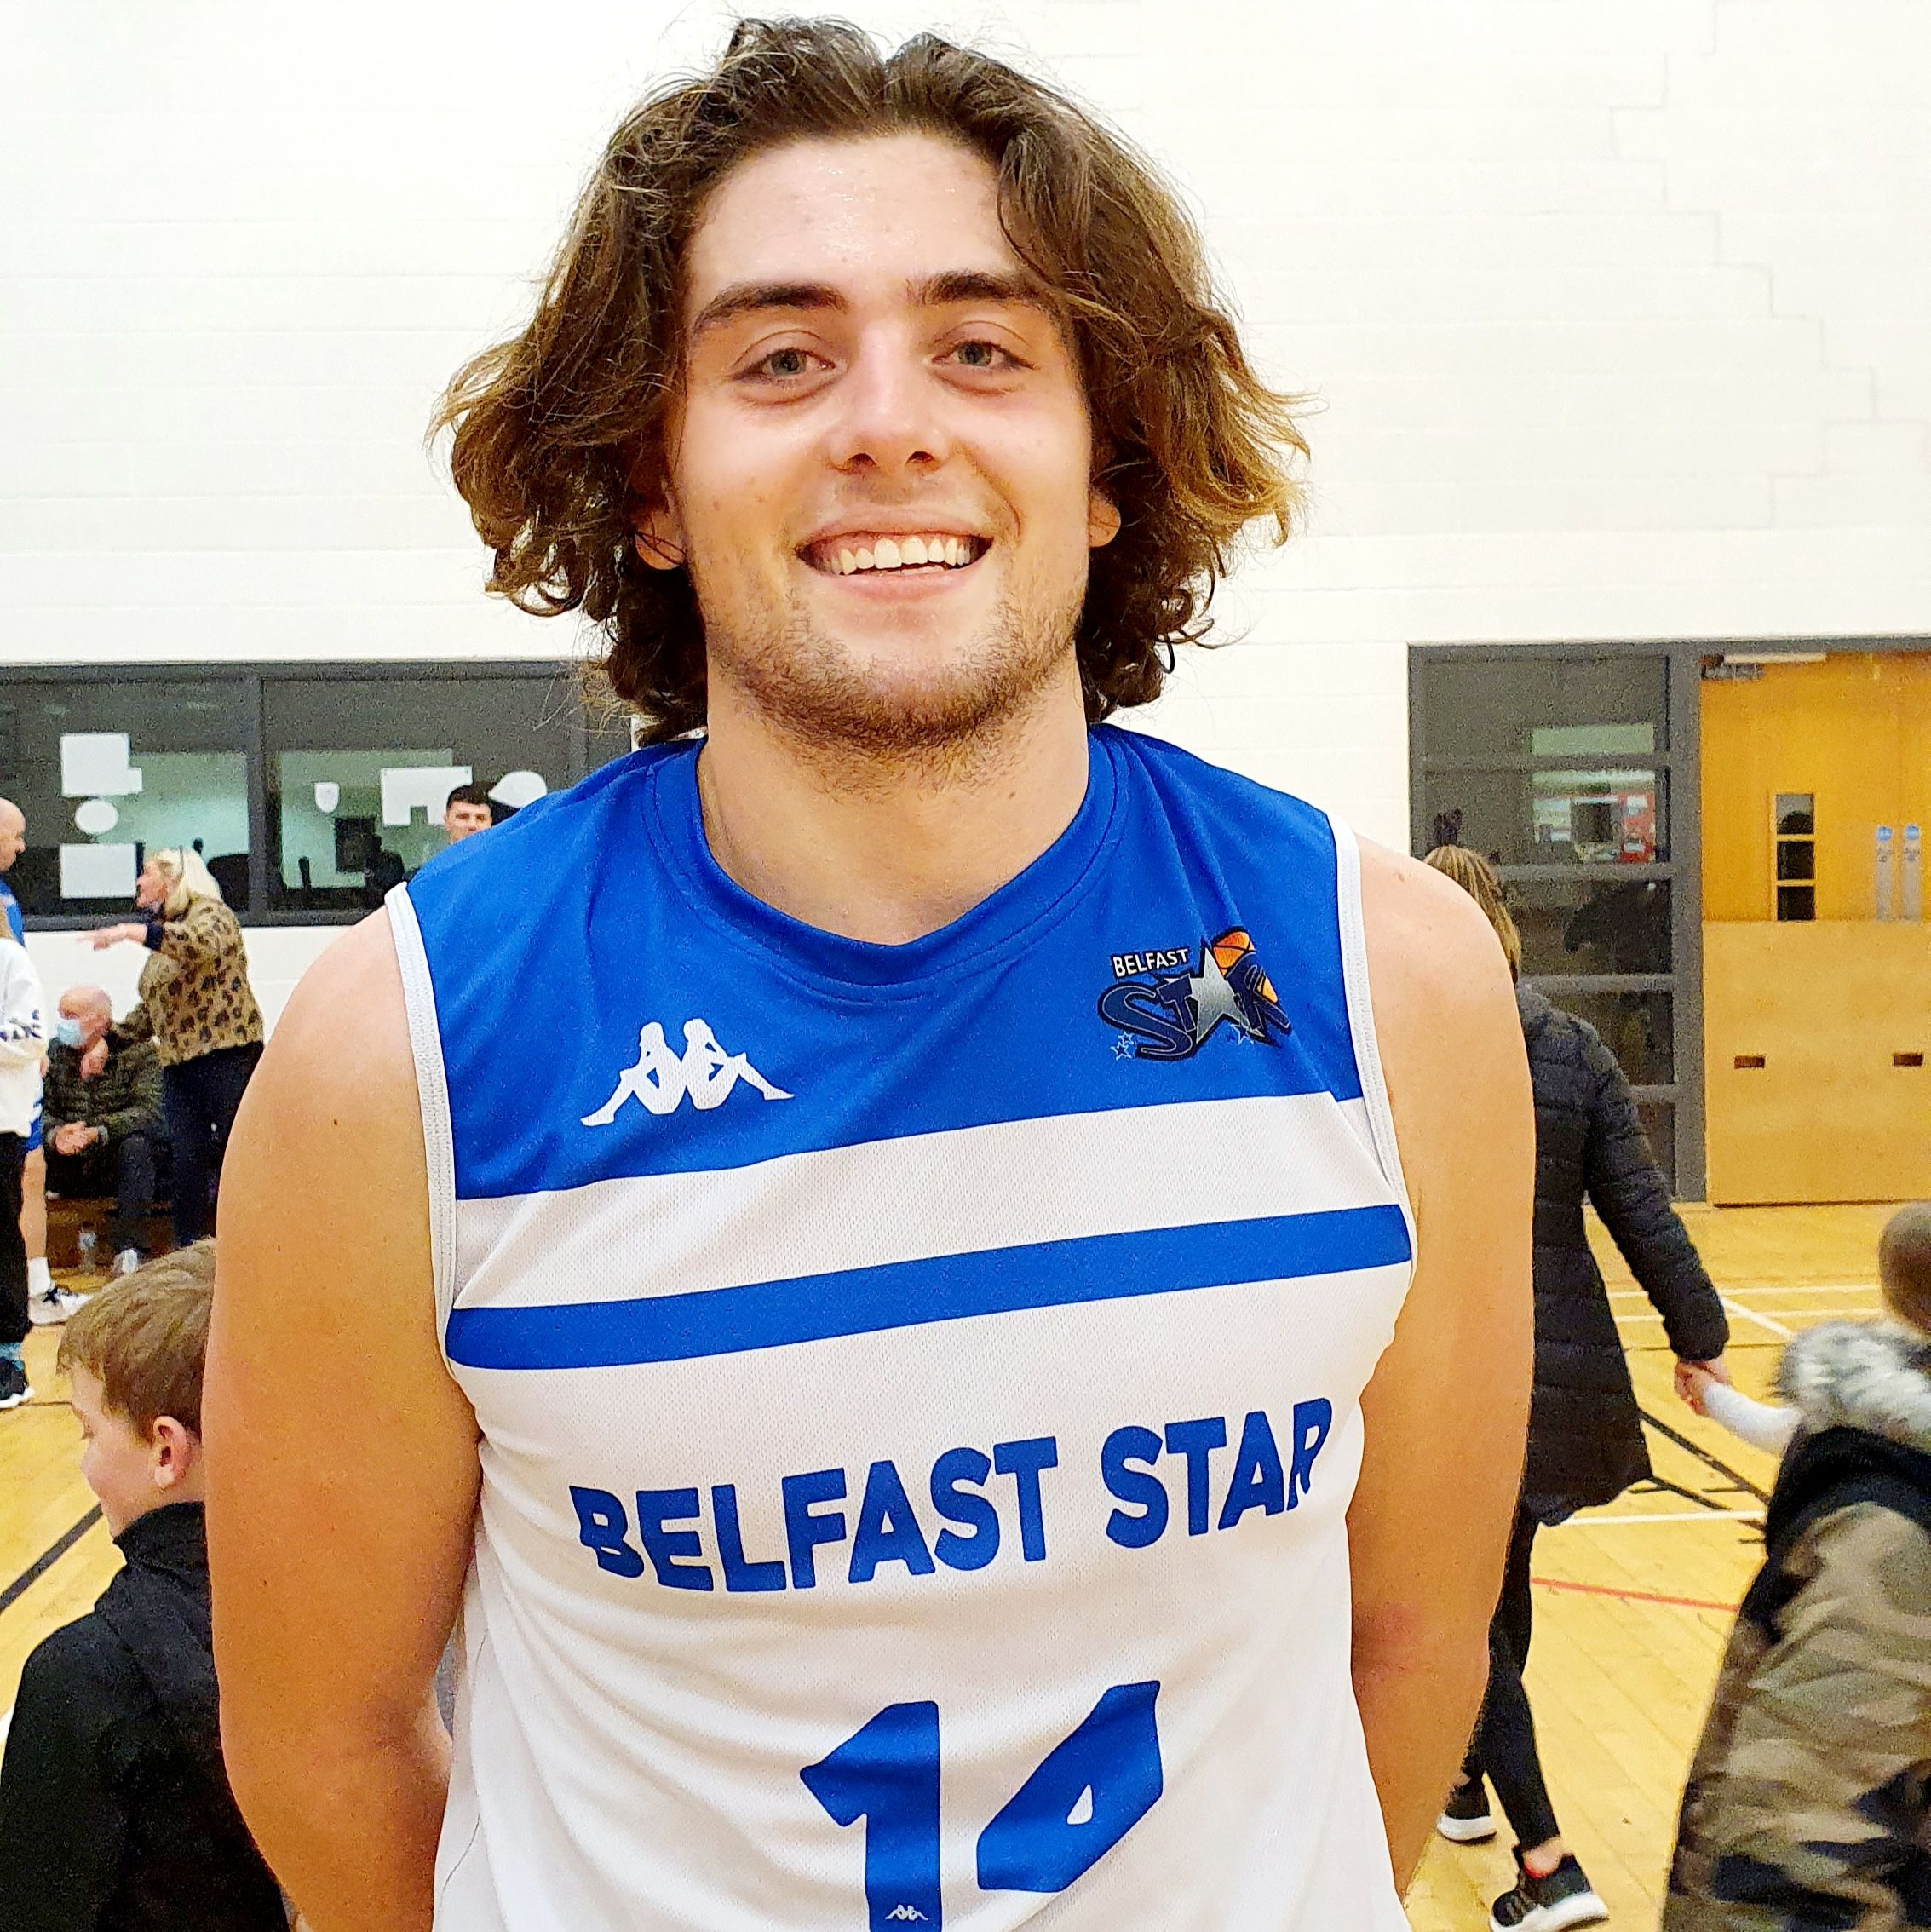 Max Cooper top-scored for Star with 21 points